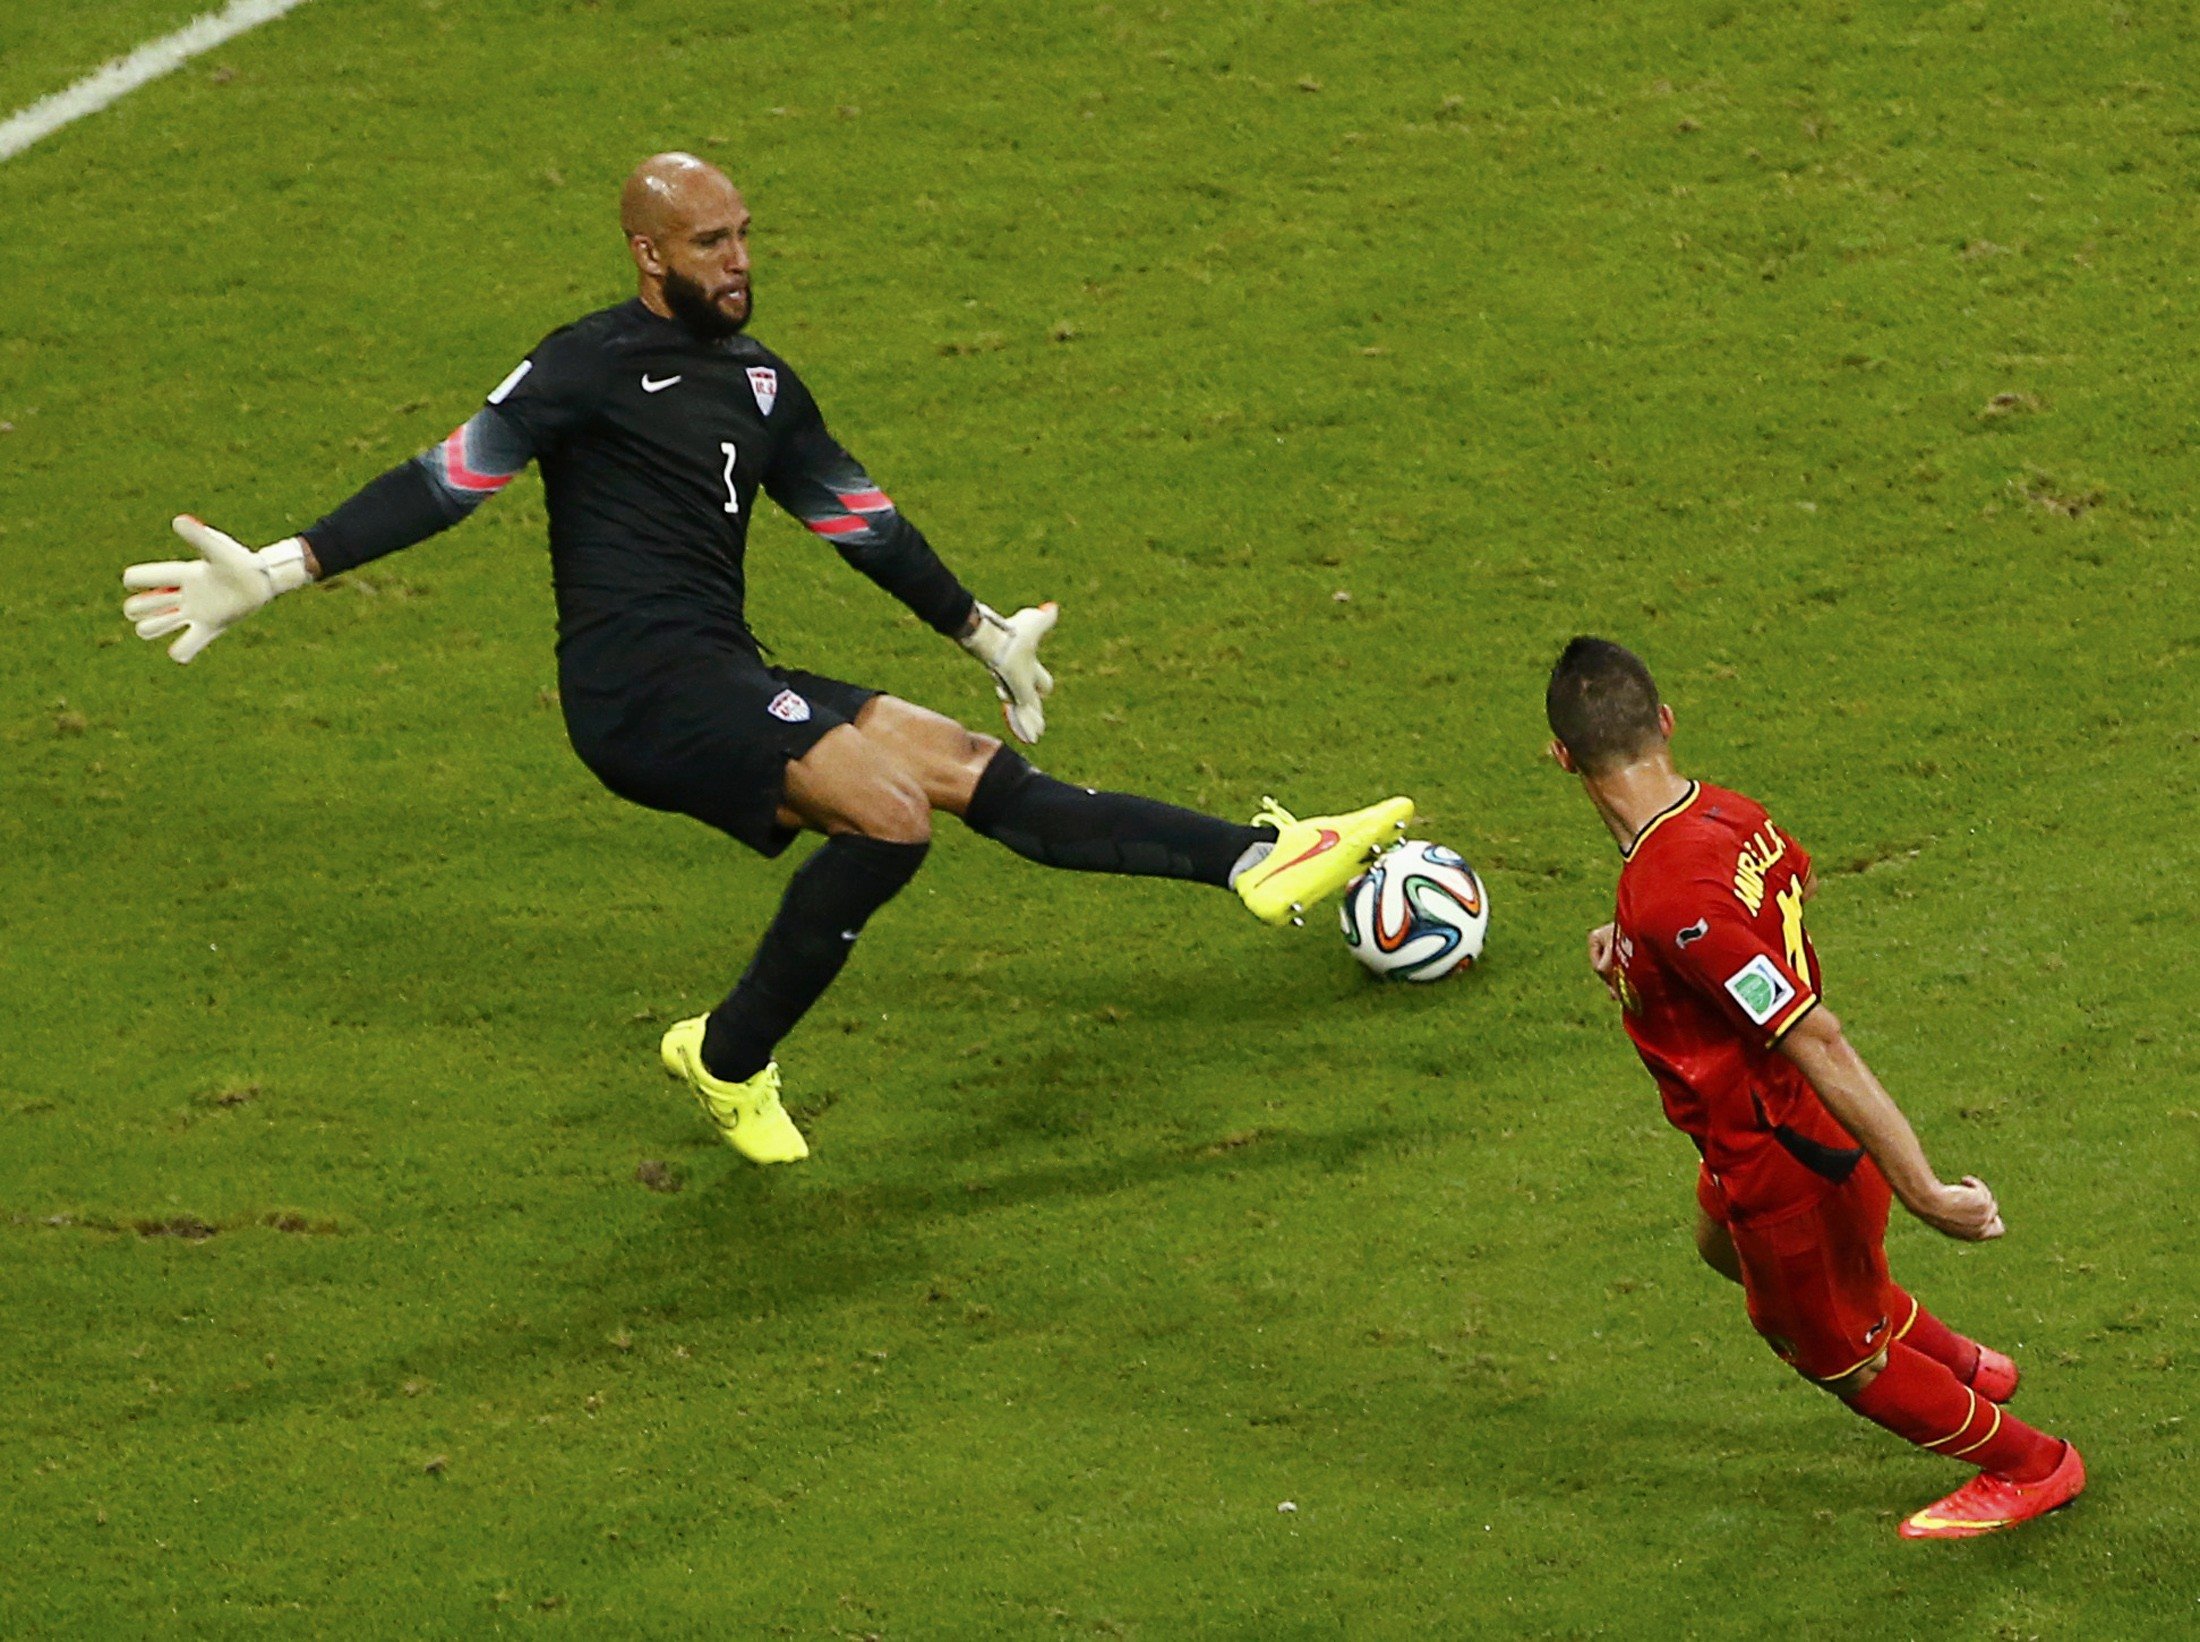 Goalkeeper Tim Howard of the U.S. blocks a shot by Belgium's Kevin Mirallas during their game at the Fonte Nova arena in Salvador, Brazil on July 1, 2014.